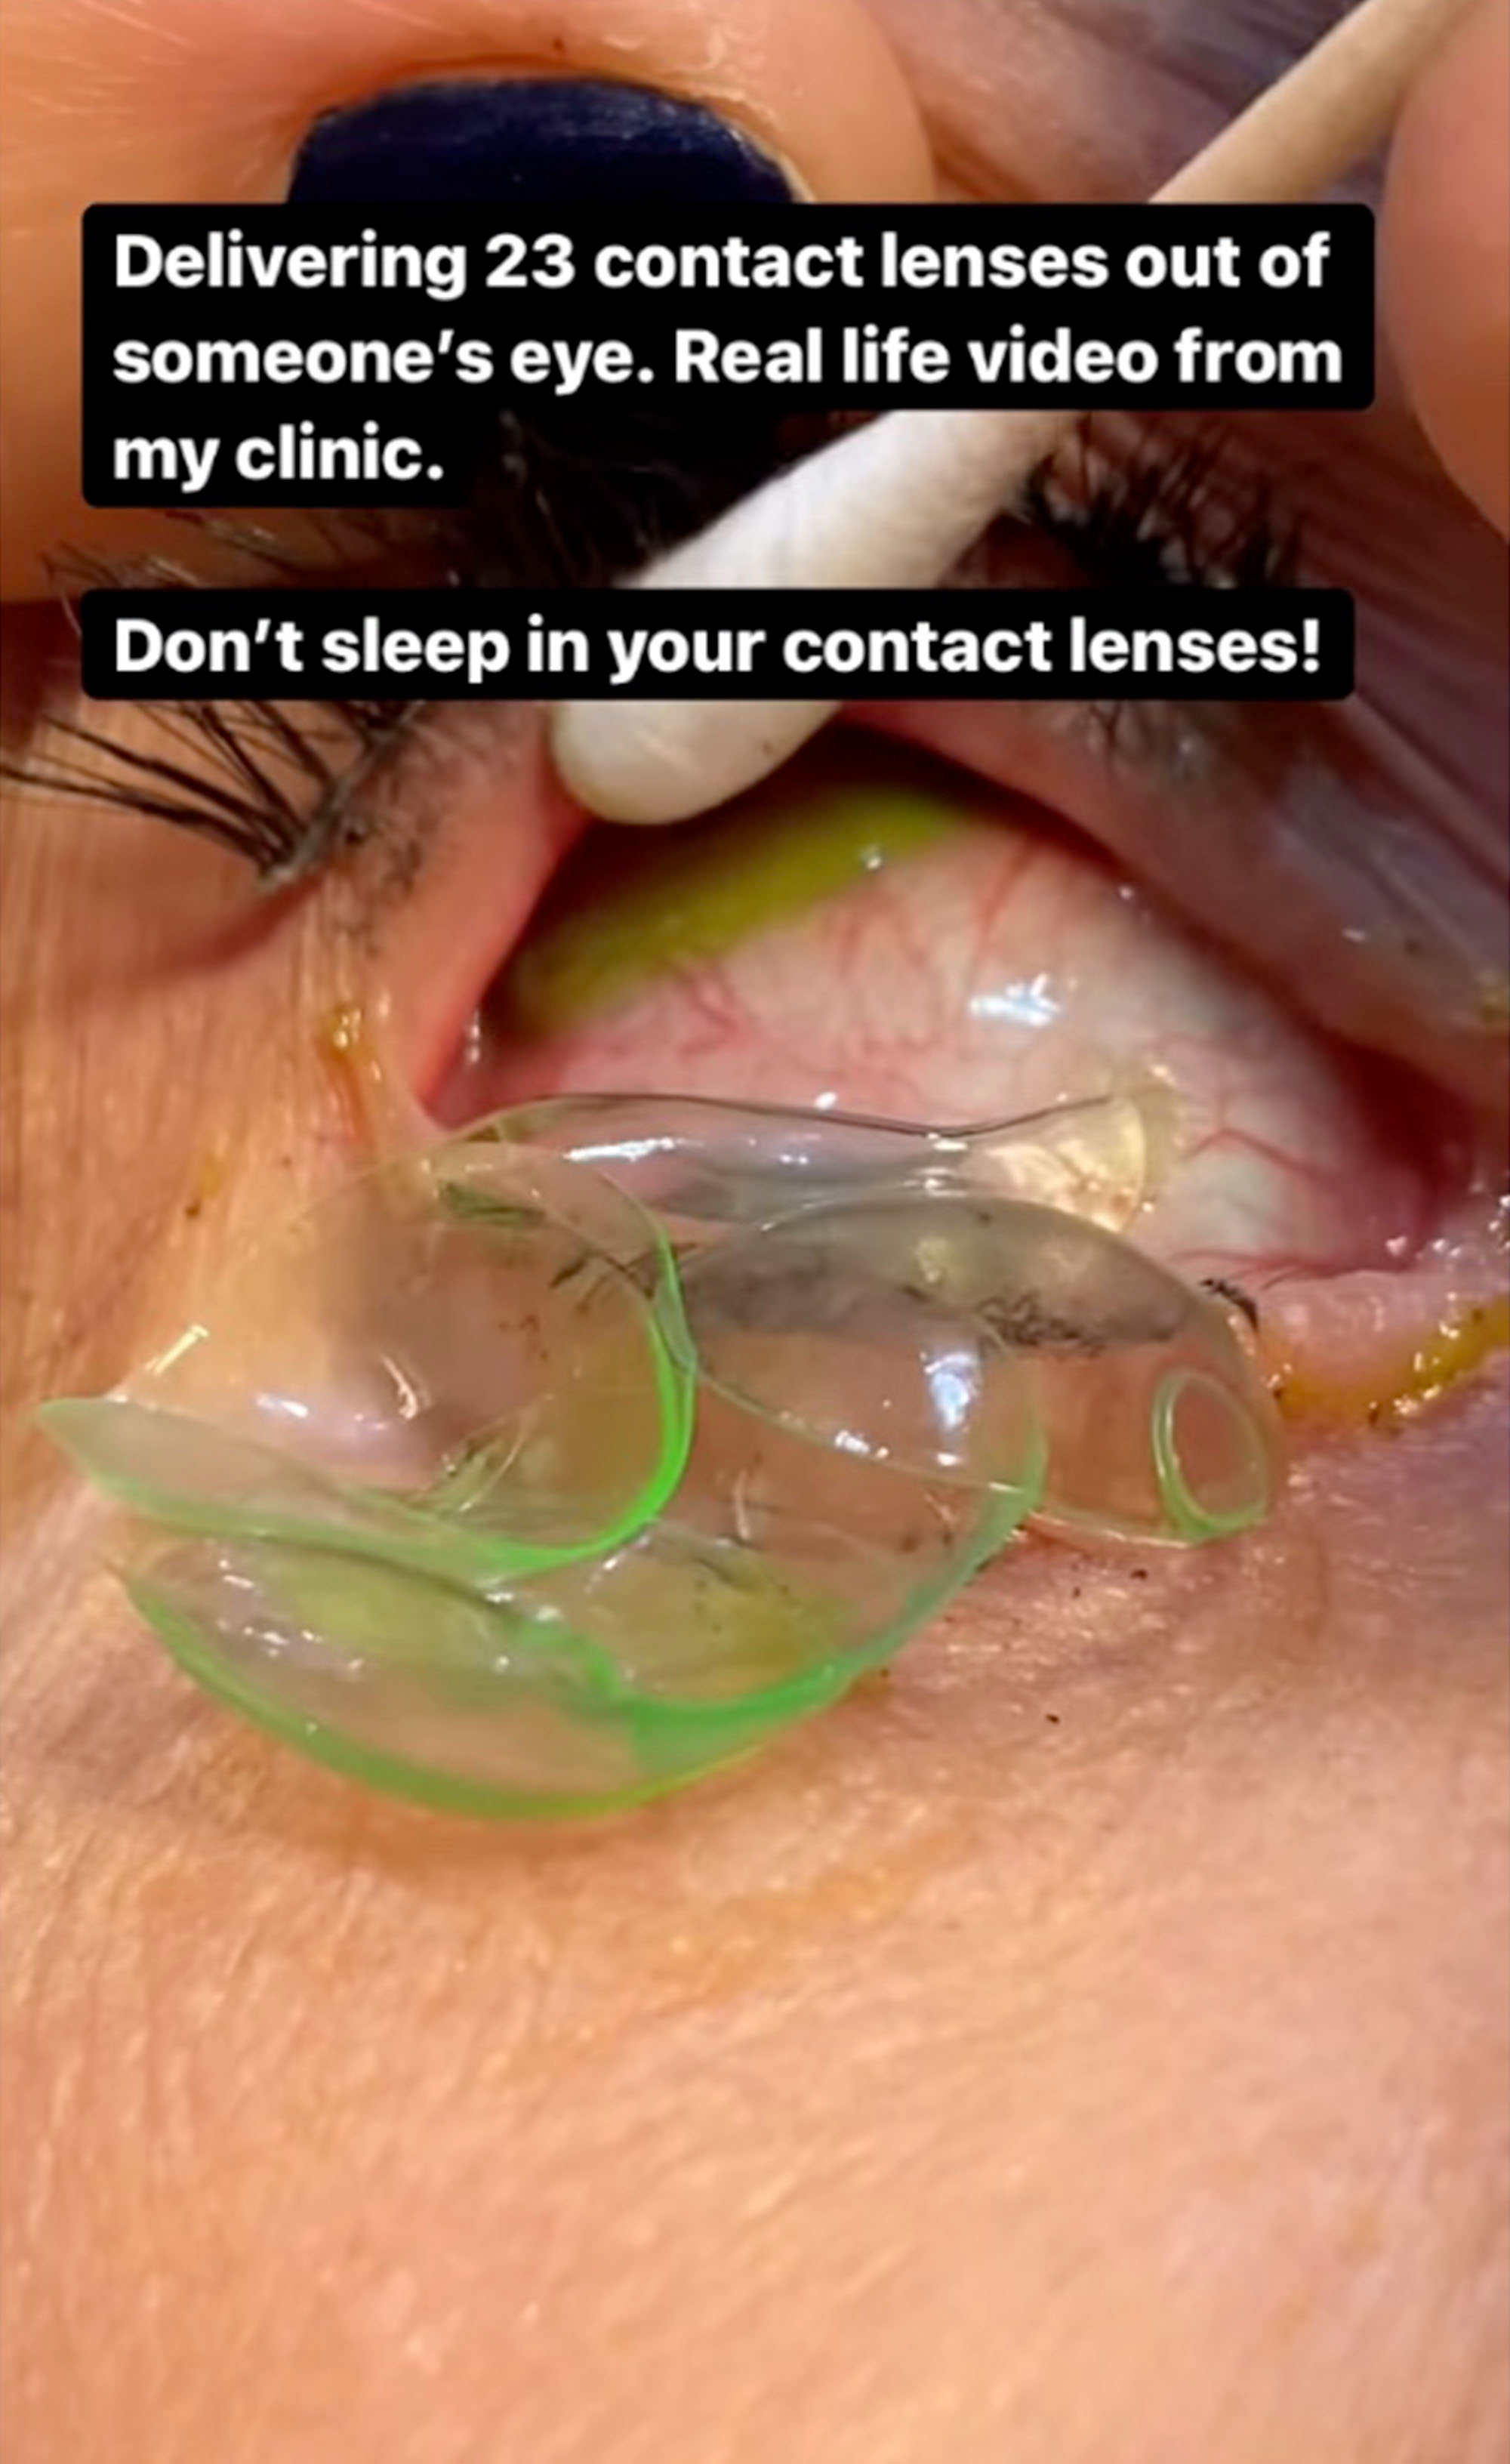 [IMG: The lump of contact lenses, from her video]